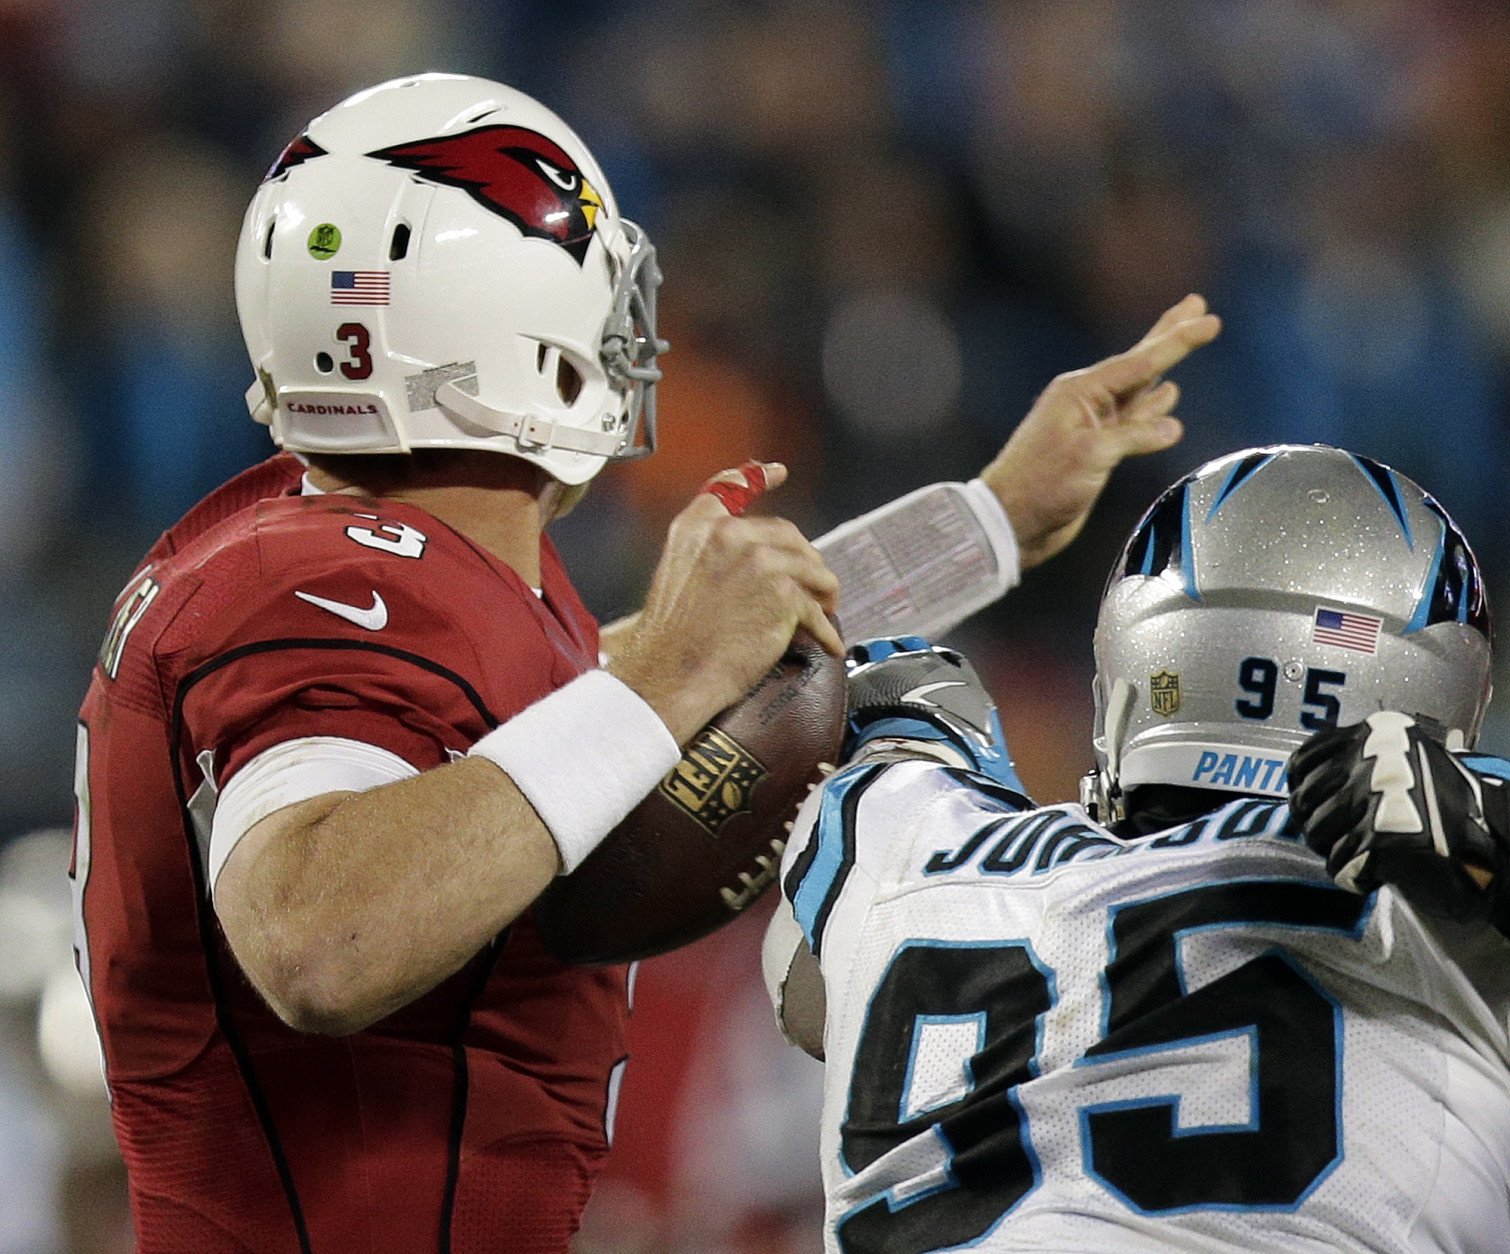 Carolina Panthers' Charles Johnson knocks the ball away from Arizona Cardinals' Carson Palmer during the first half the NFL football NFC Championship game Sunday, Jan. 24, 2016, in Charlotte, N.C. The Panthers recovered the ball. (AP Photo/Chuck Burton)